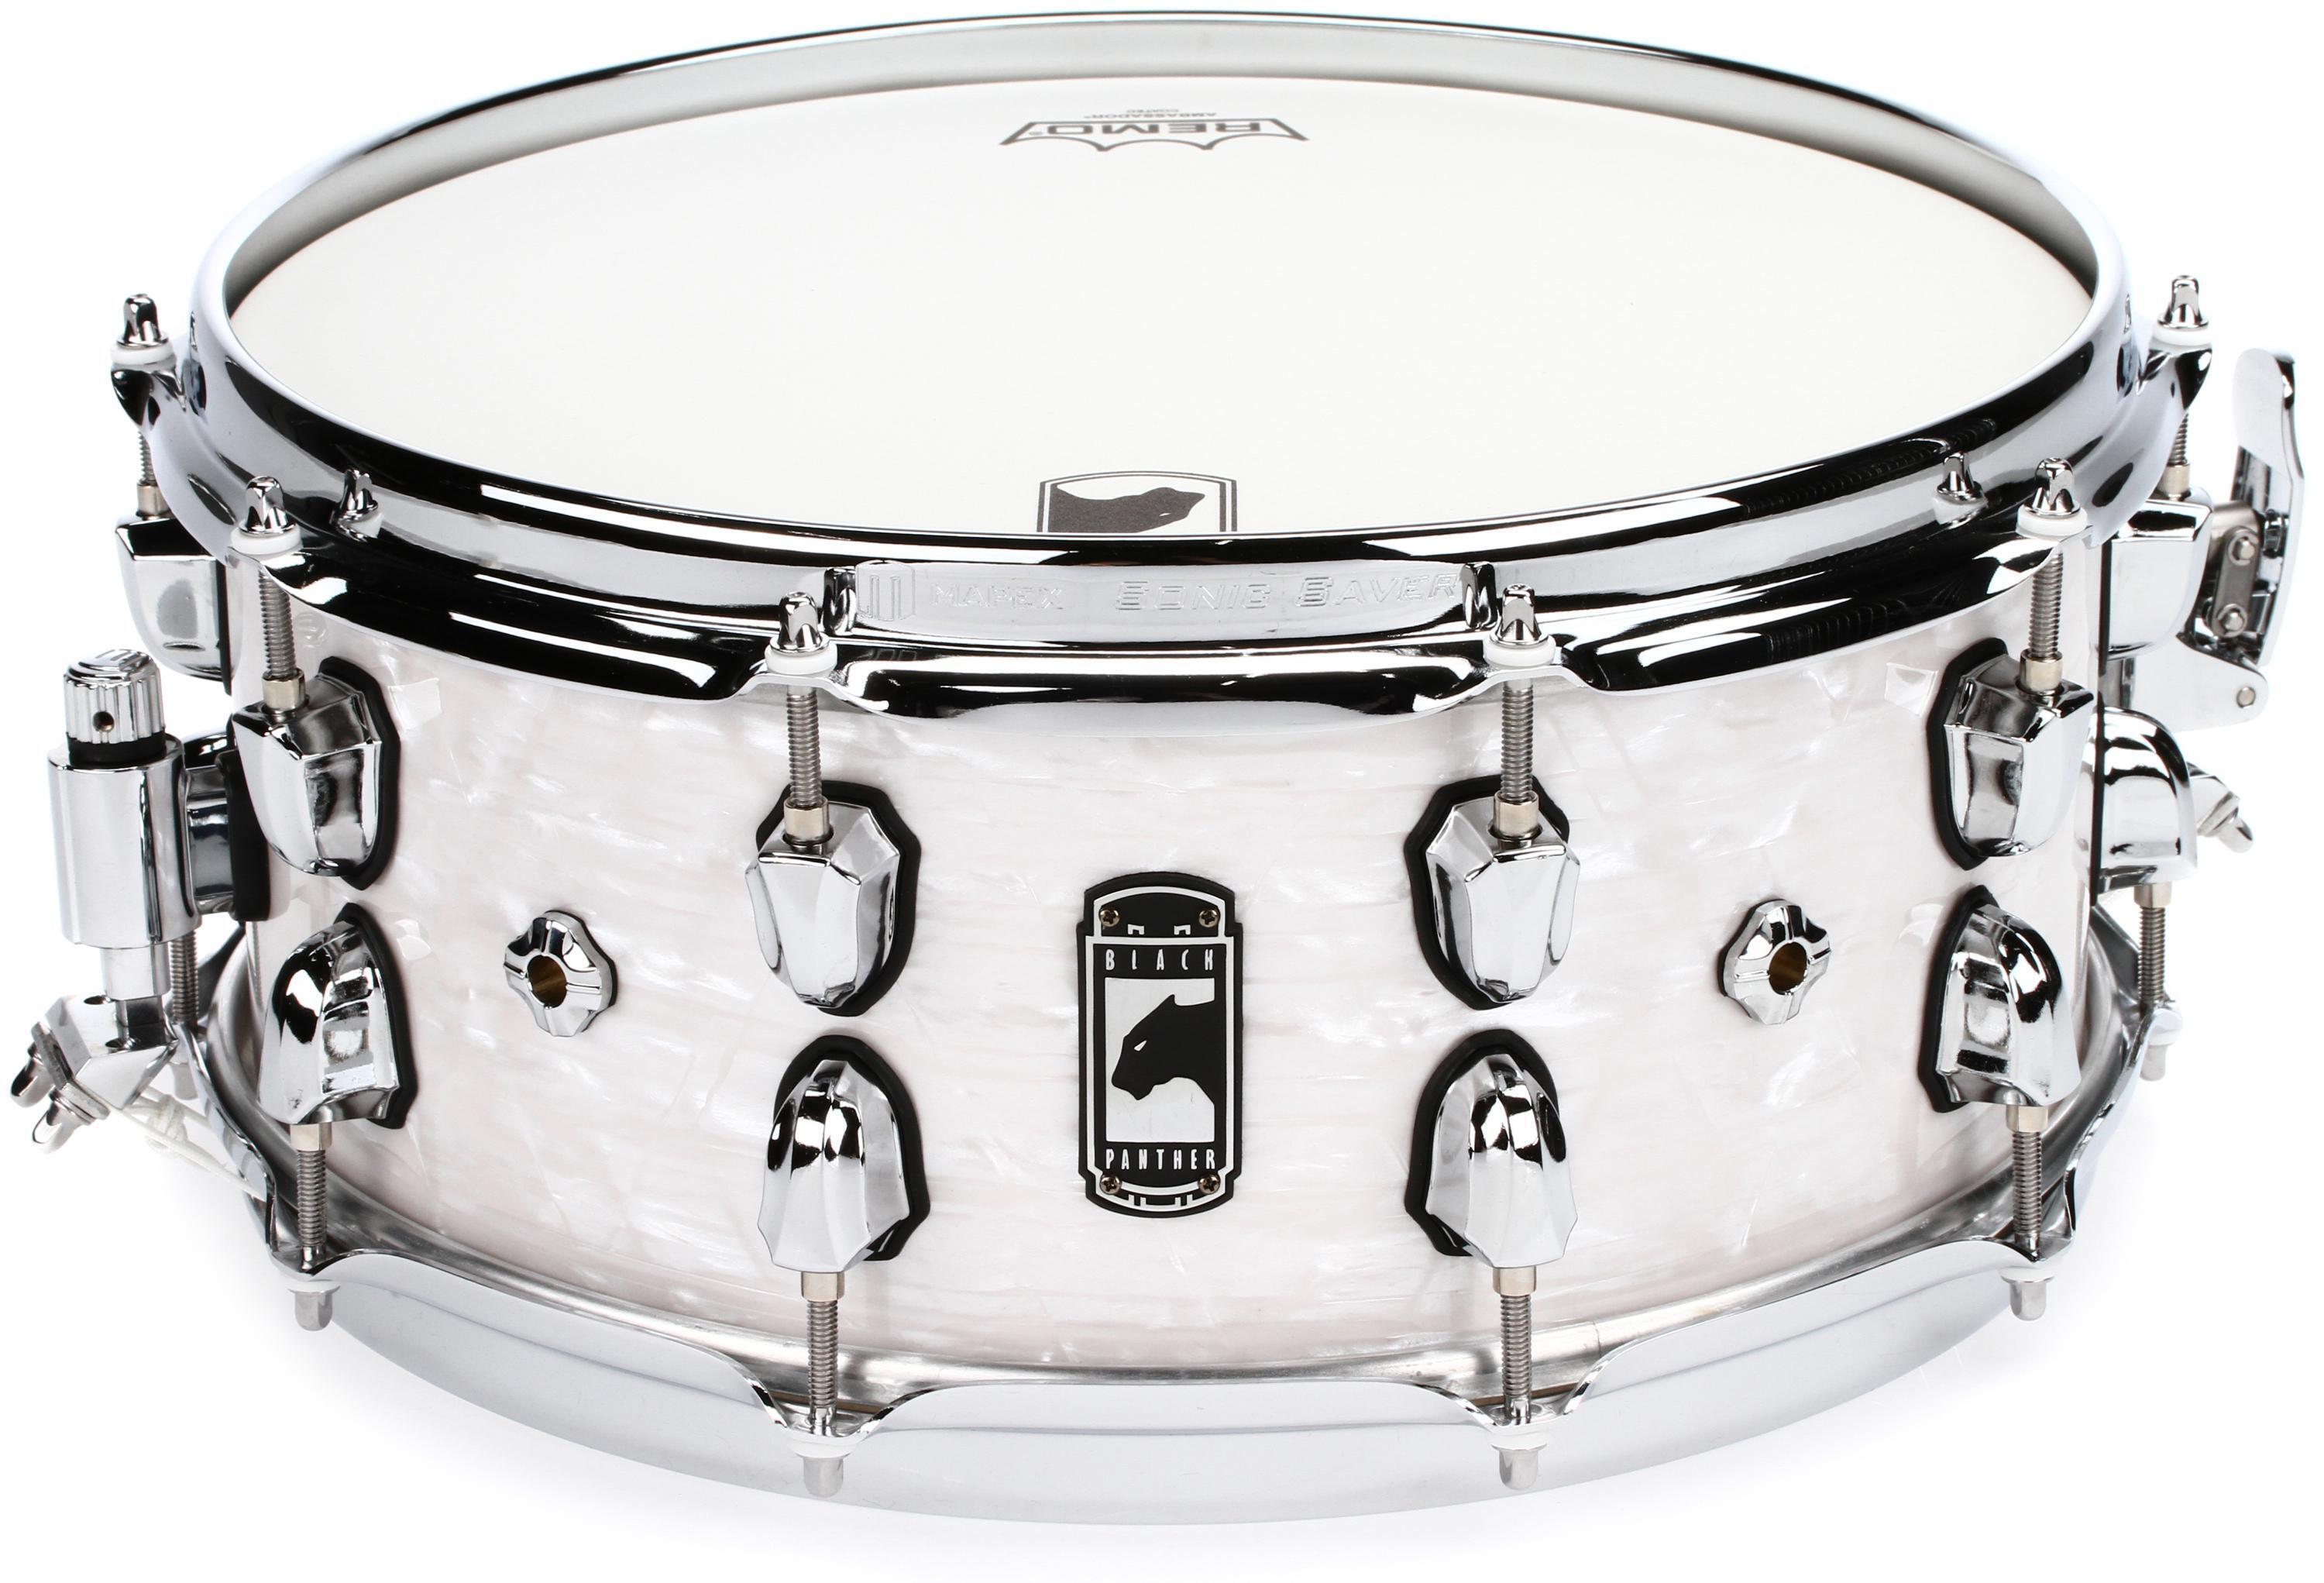 Black Panther Heritage Snare Drum - 6 x 14-inch - White Strata 